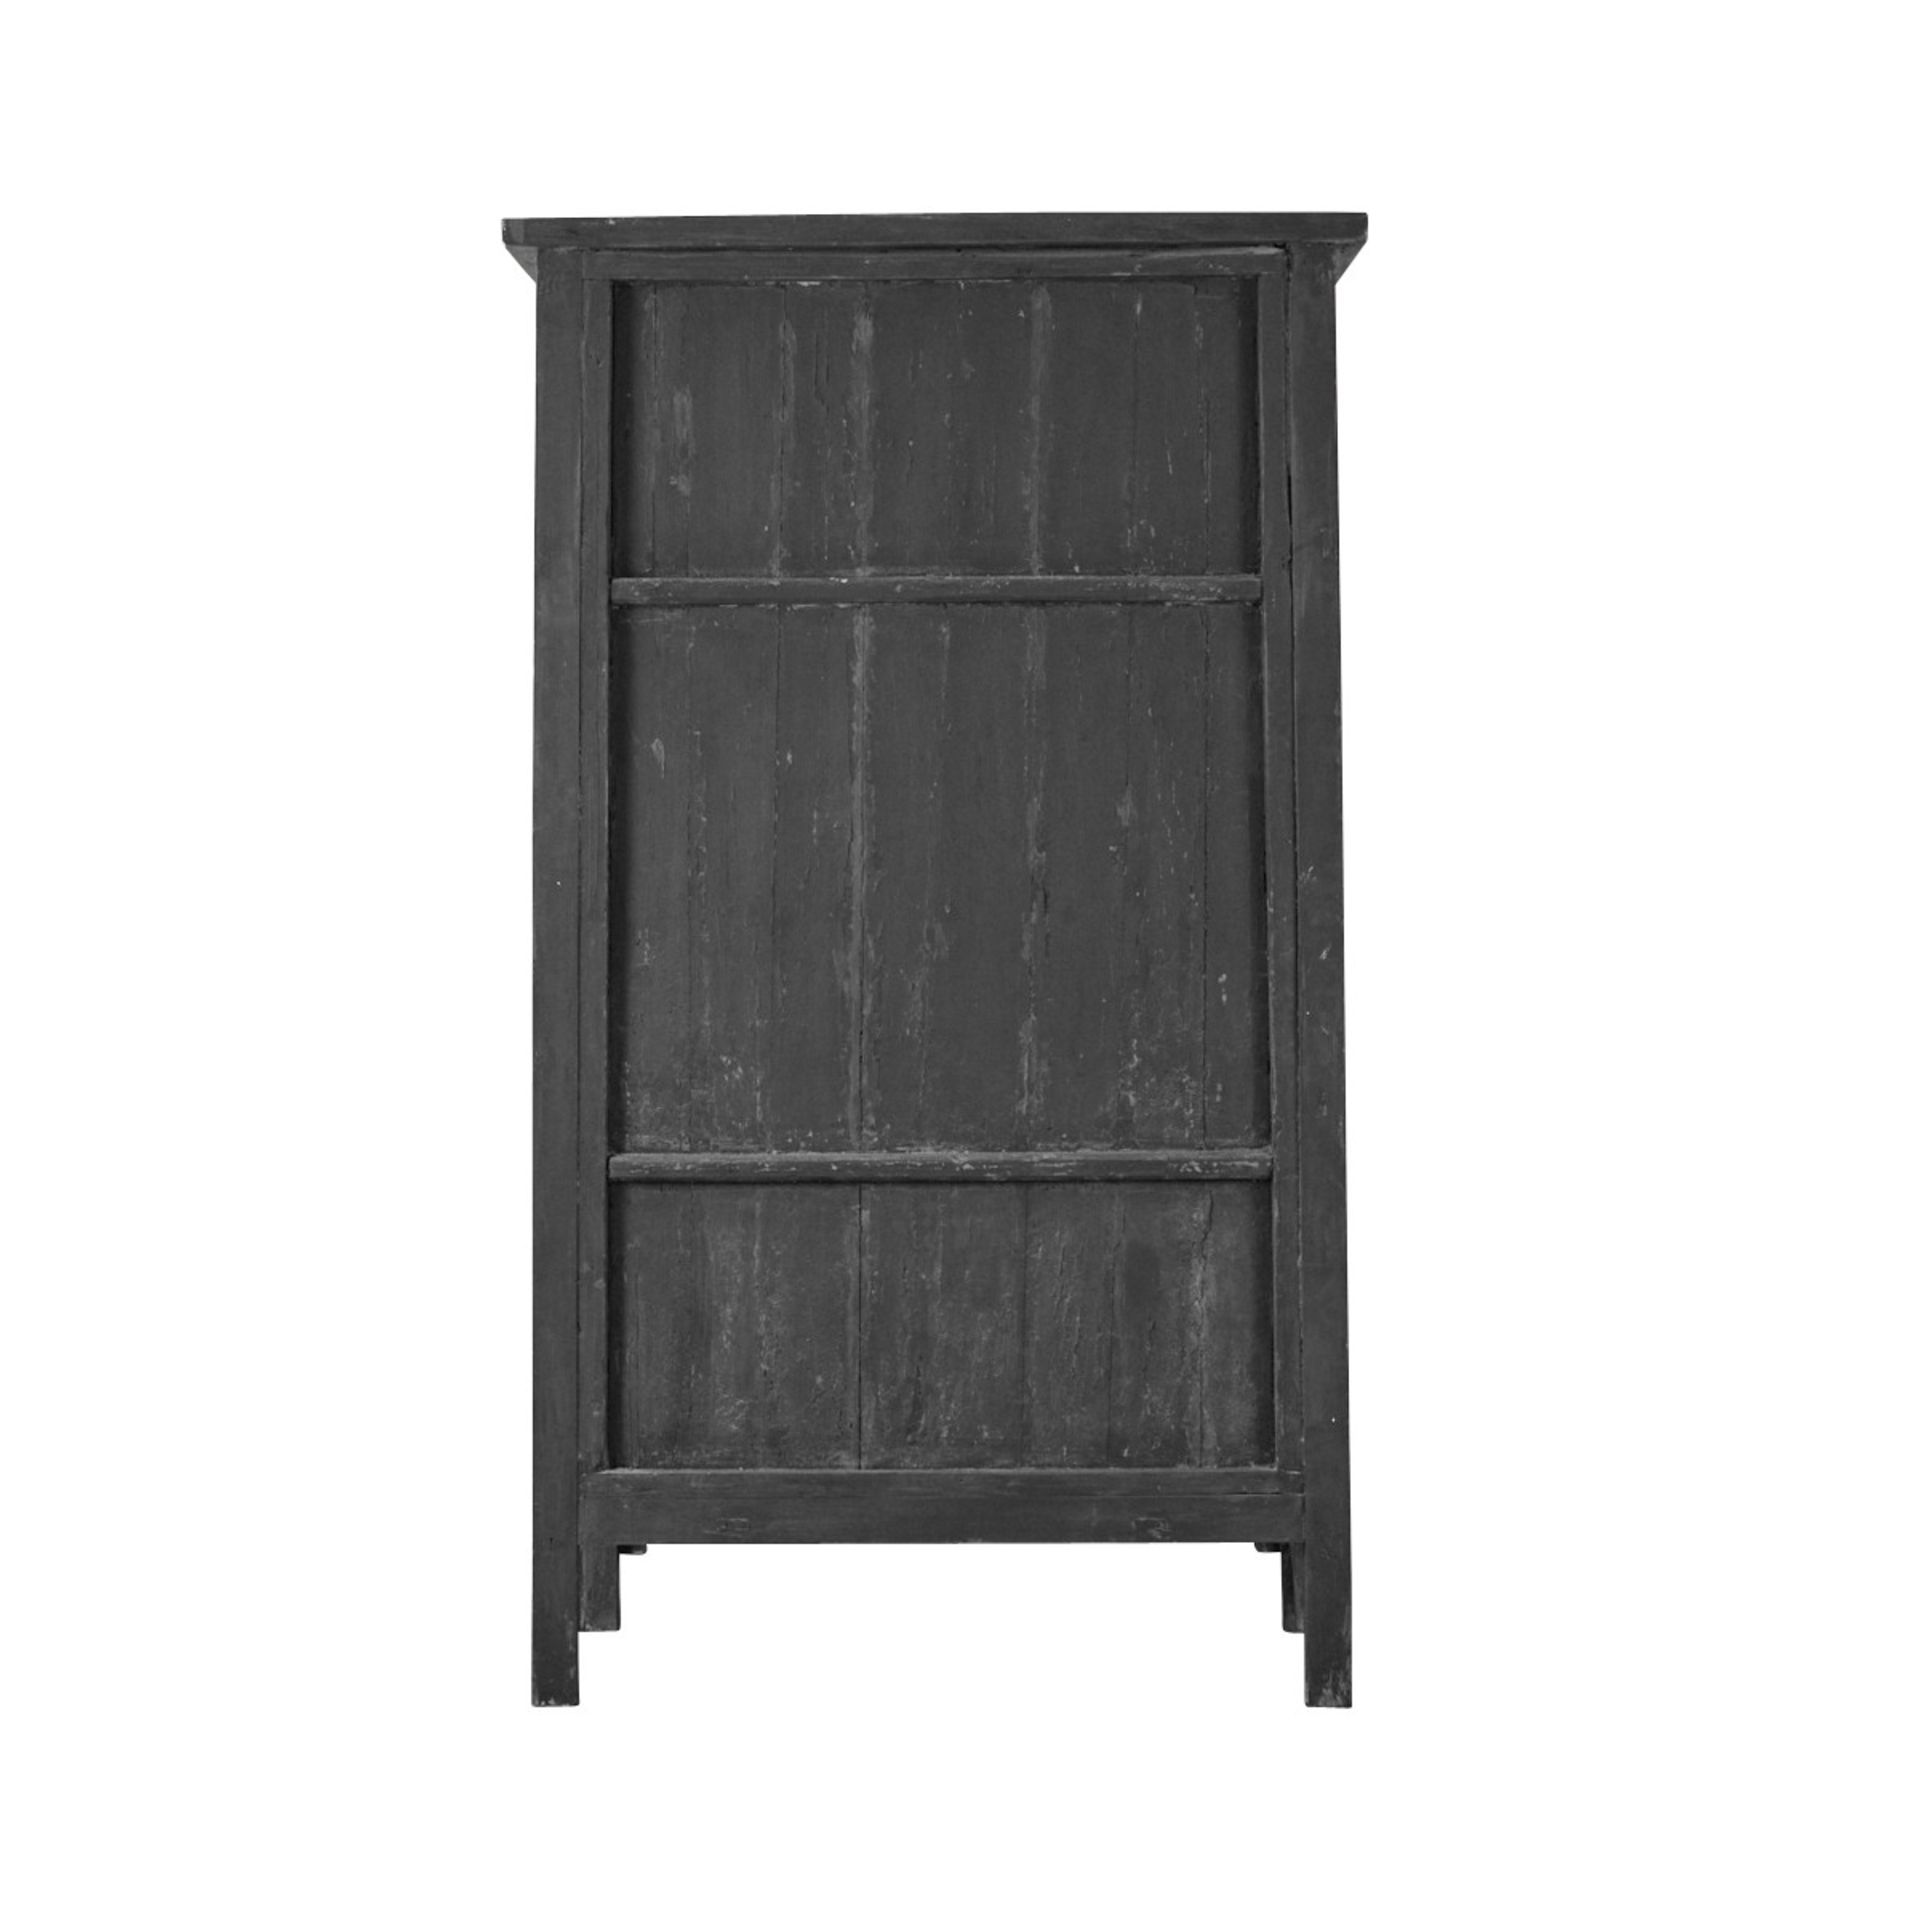 Antique Chinese Wood Cabinet or Wardrobe - Image 5 of 15